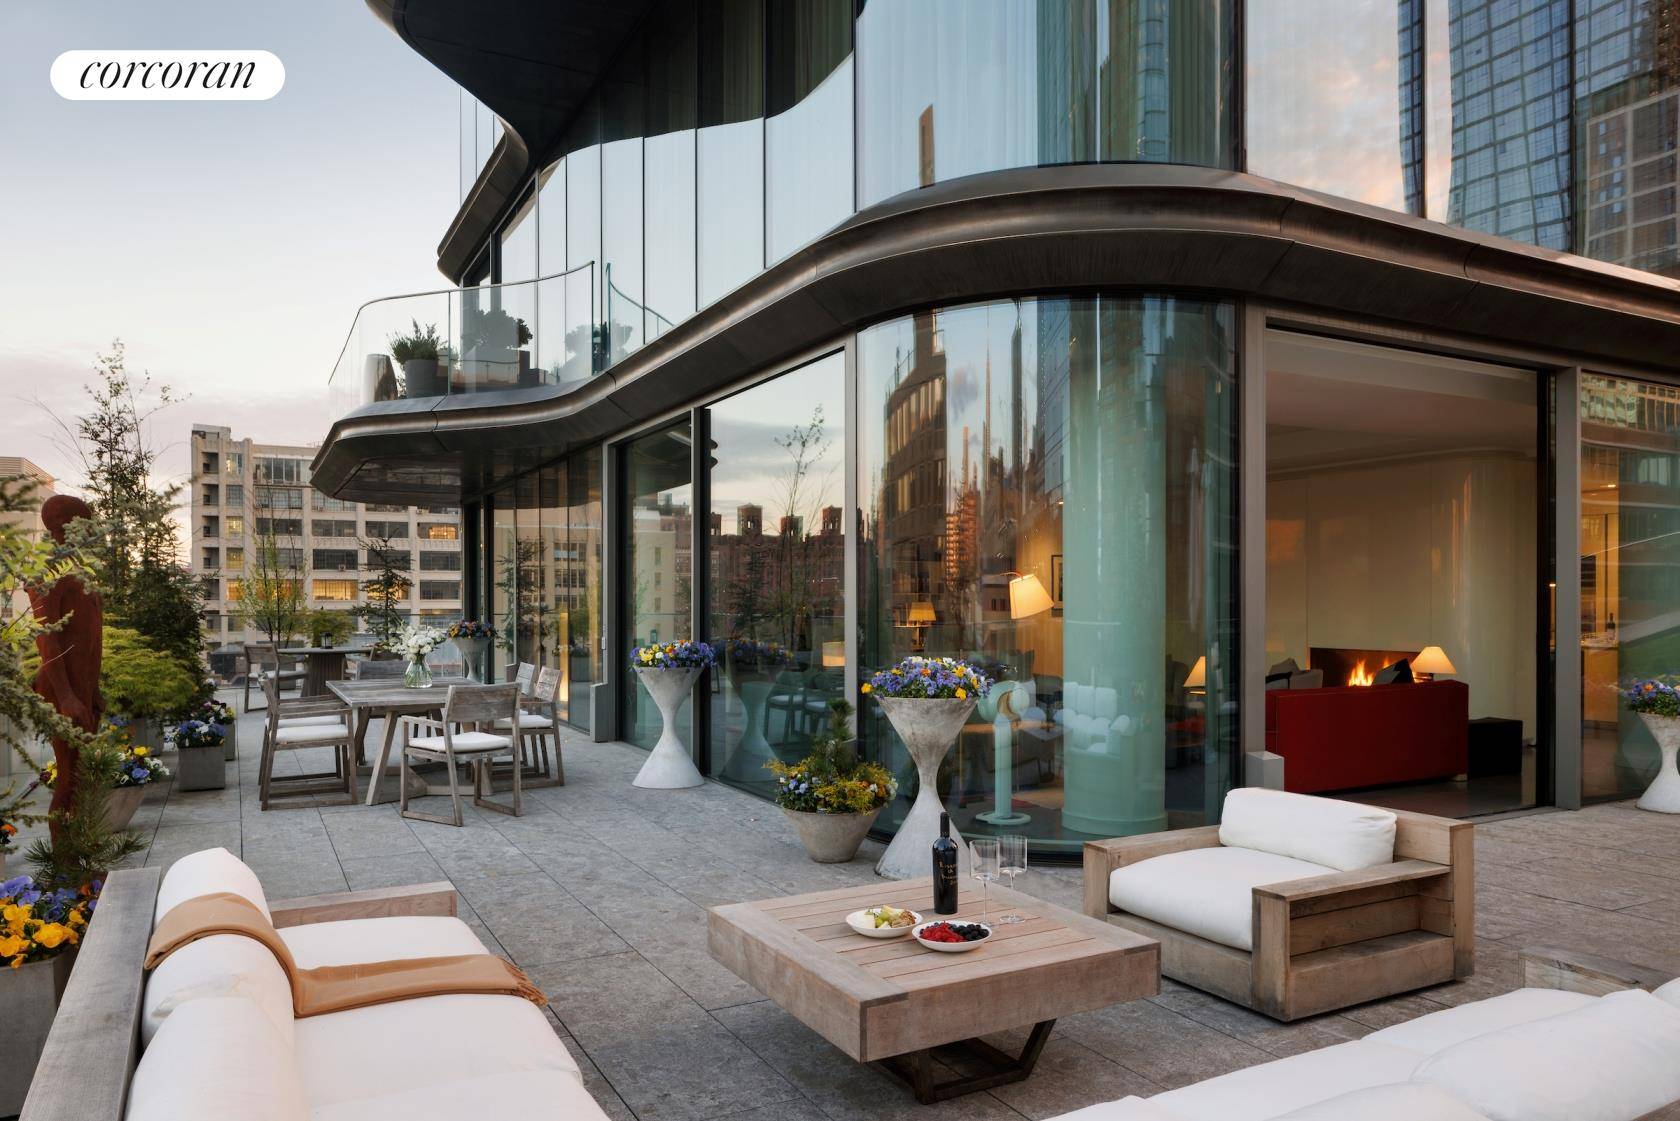 STEP OUT ONTO YOUR WRAP AROUND TERRACE from this spectacular penthouse atop Zaha Hadid Architect's only architectural work in New York.